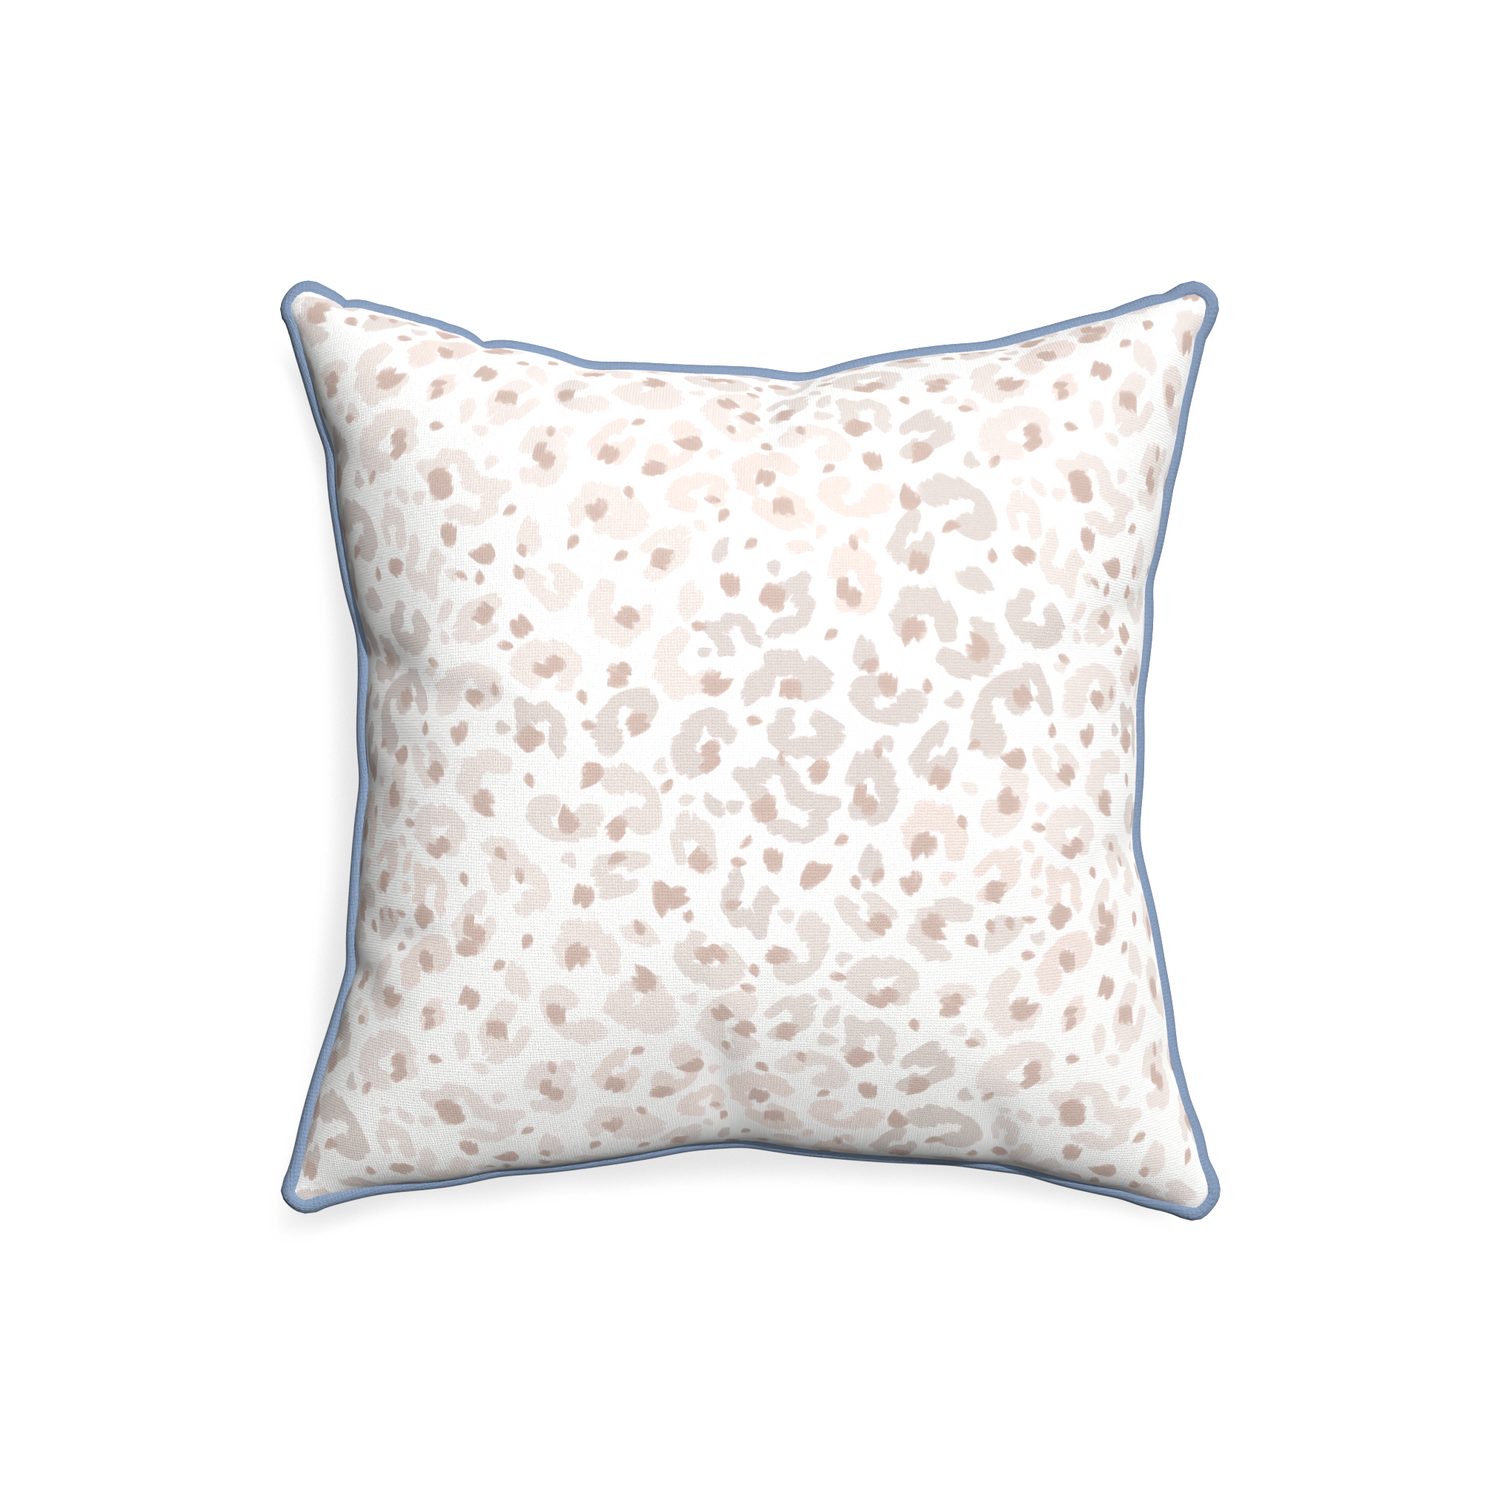 20-square rosie custom beige animal printpillow with sky piping on white background